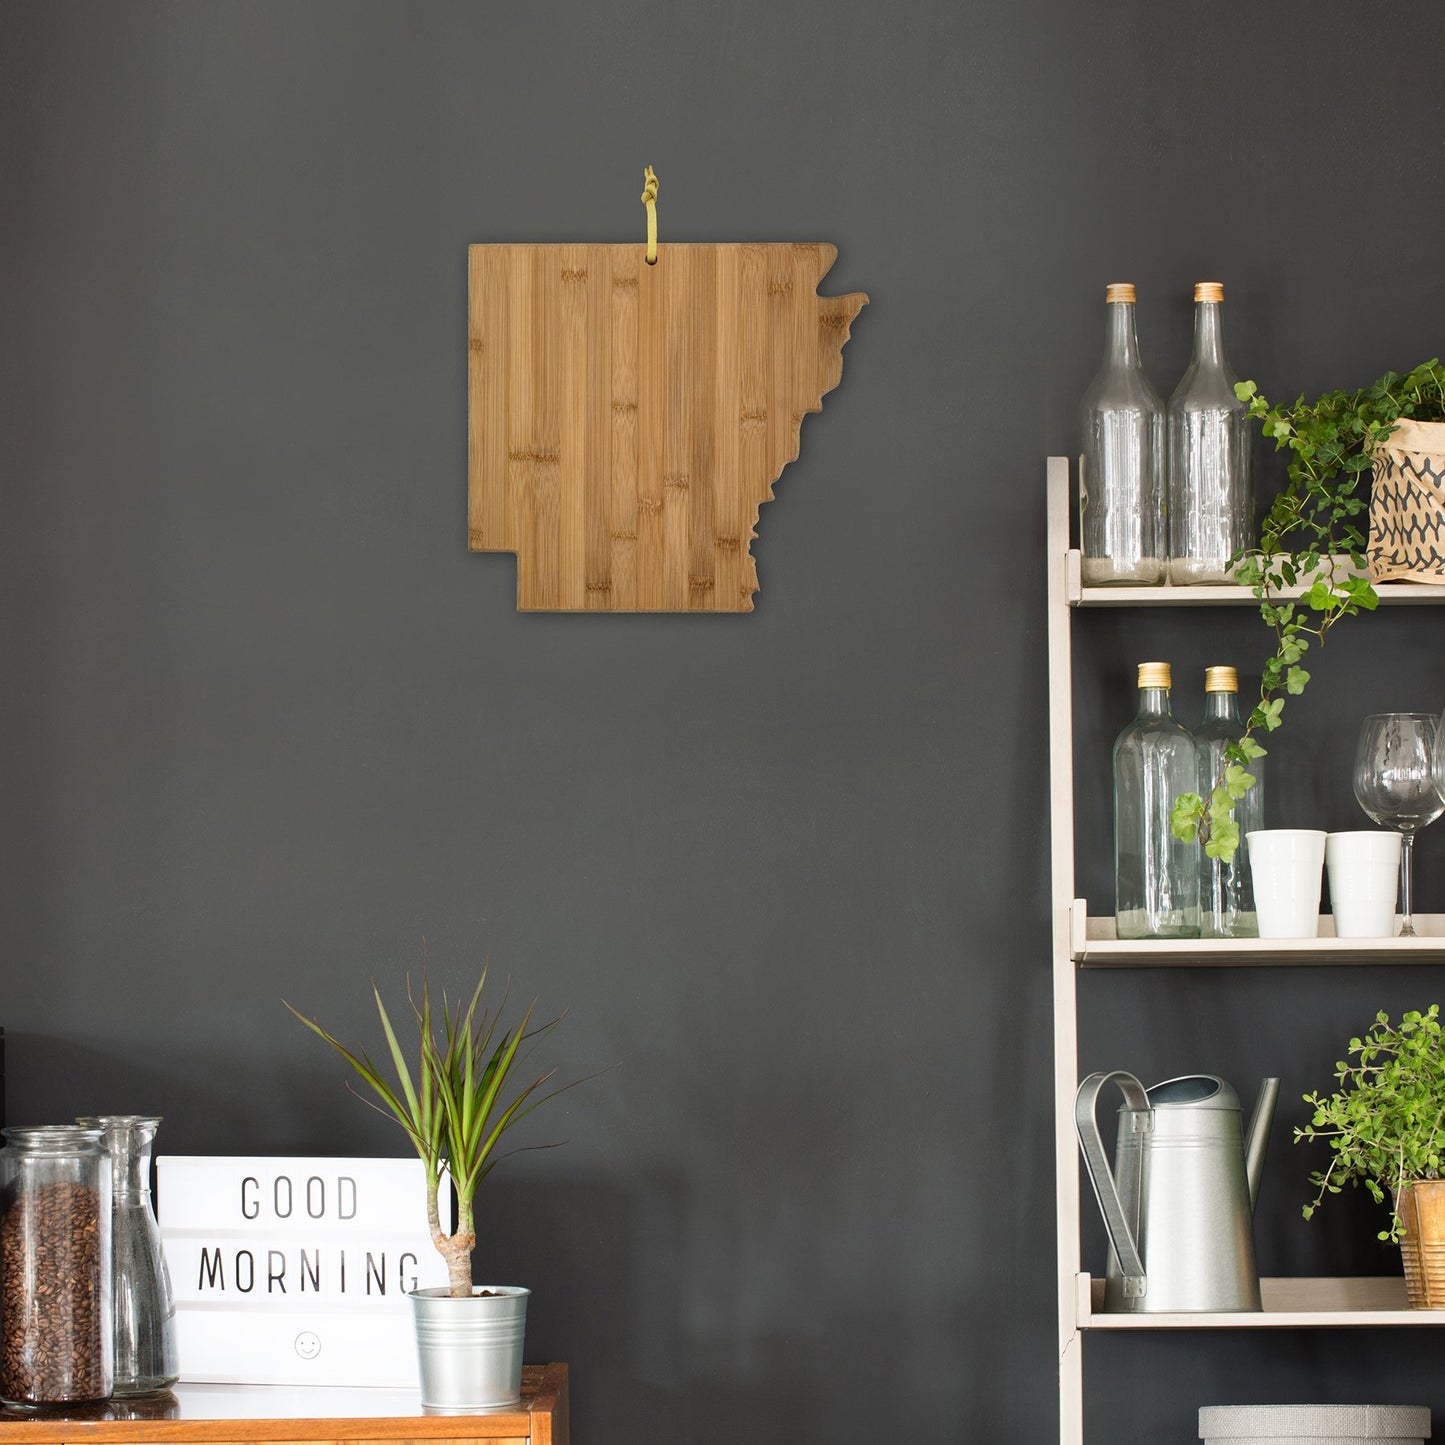 Arkansas shaped board hanging on wall, shelving with bottles, plants, and watering can on dark grey wall.